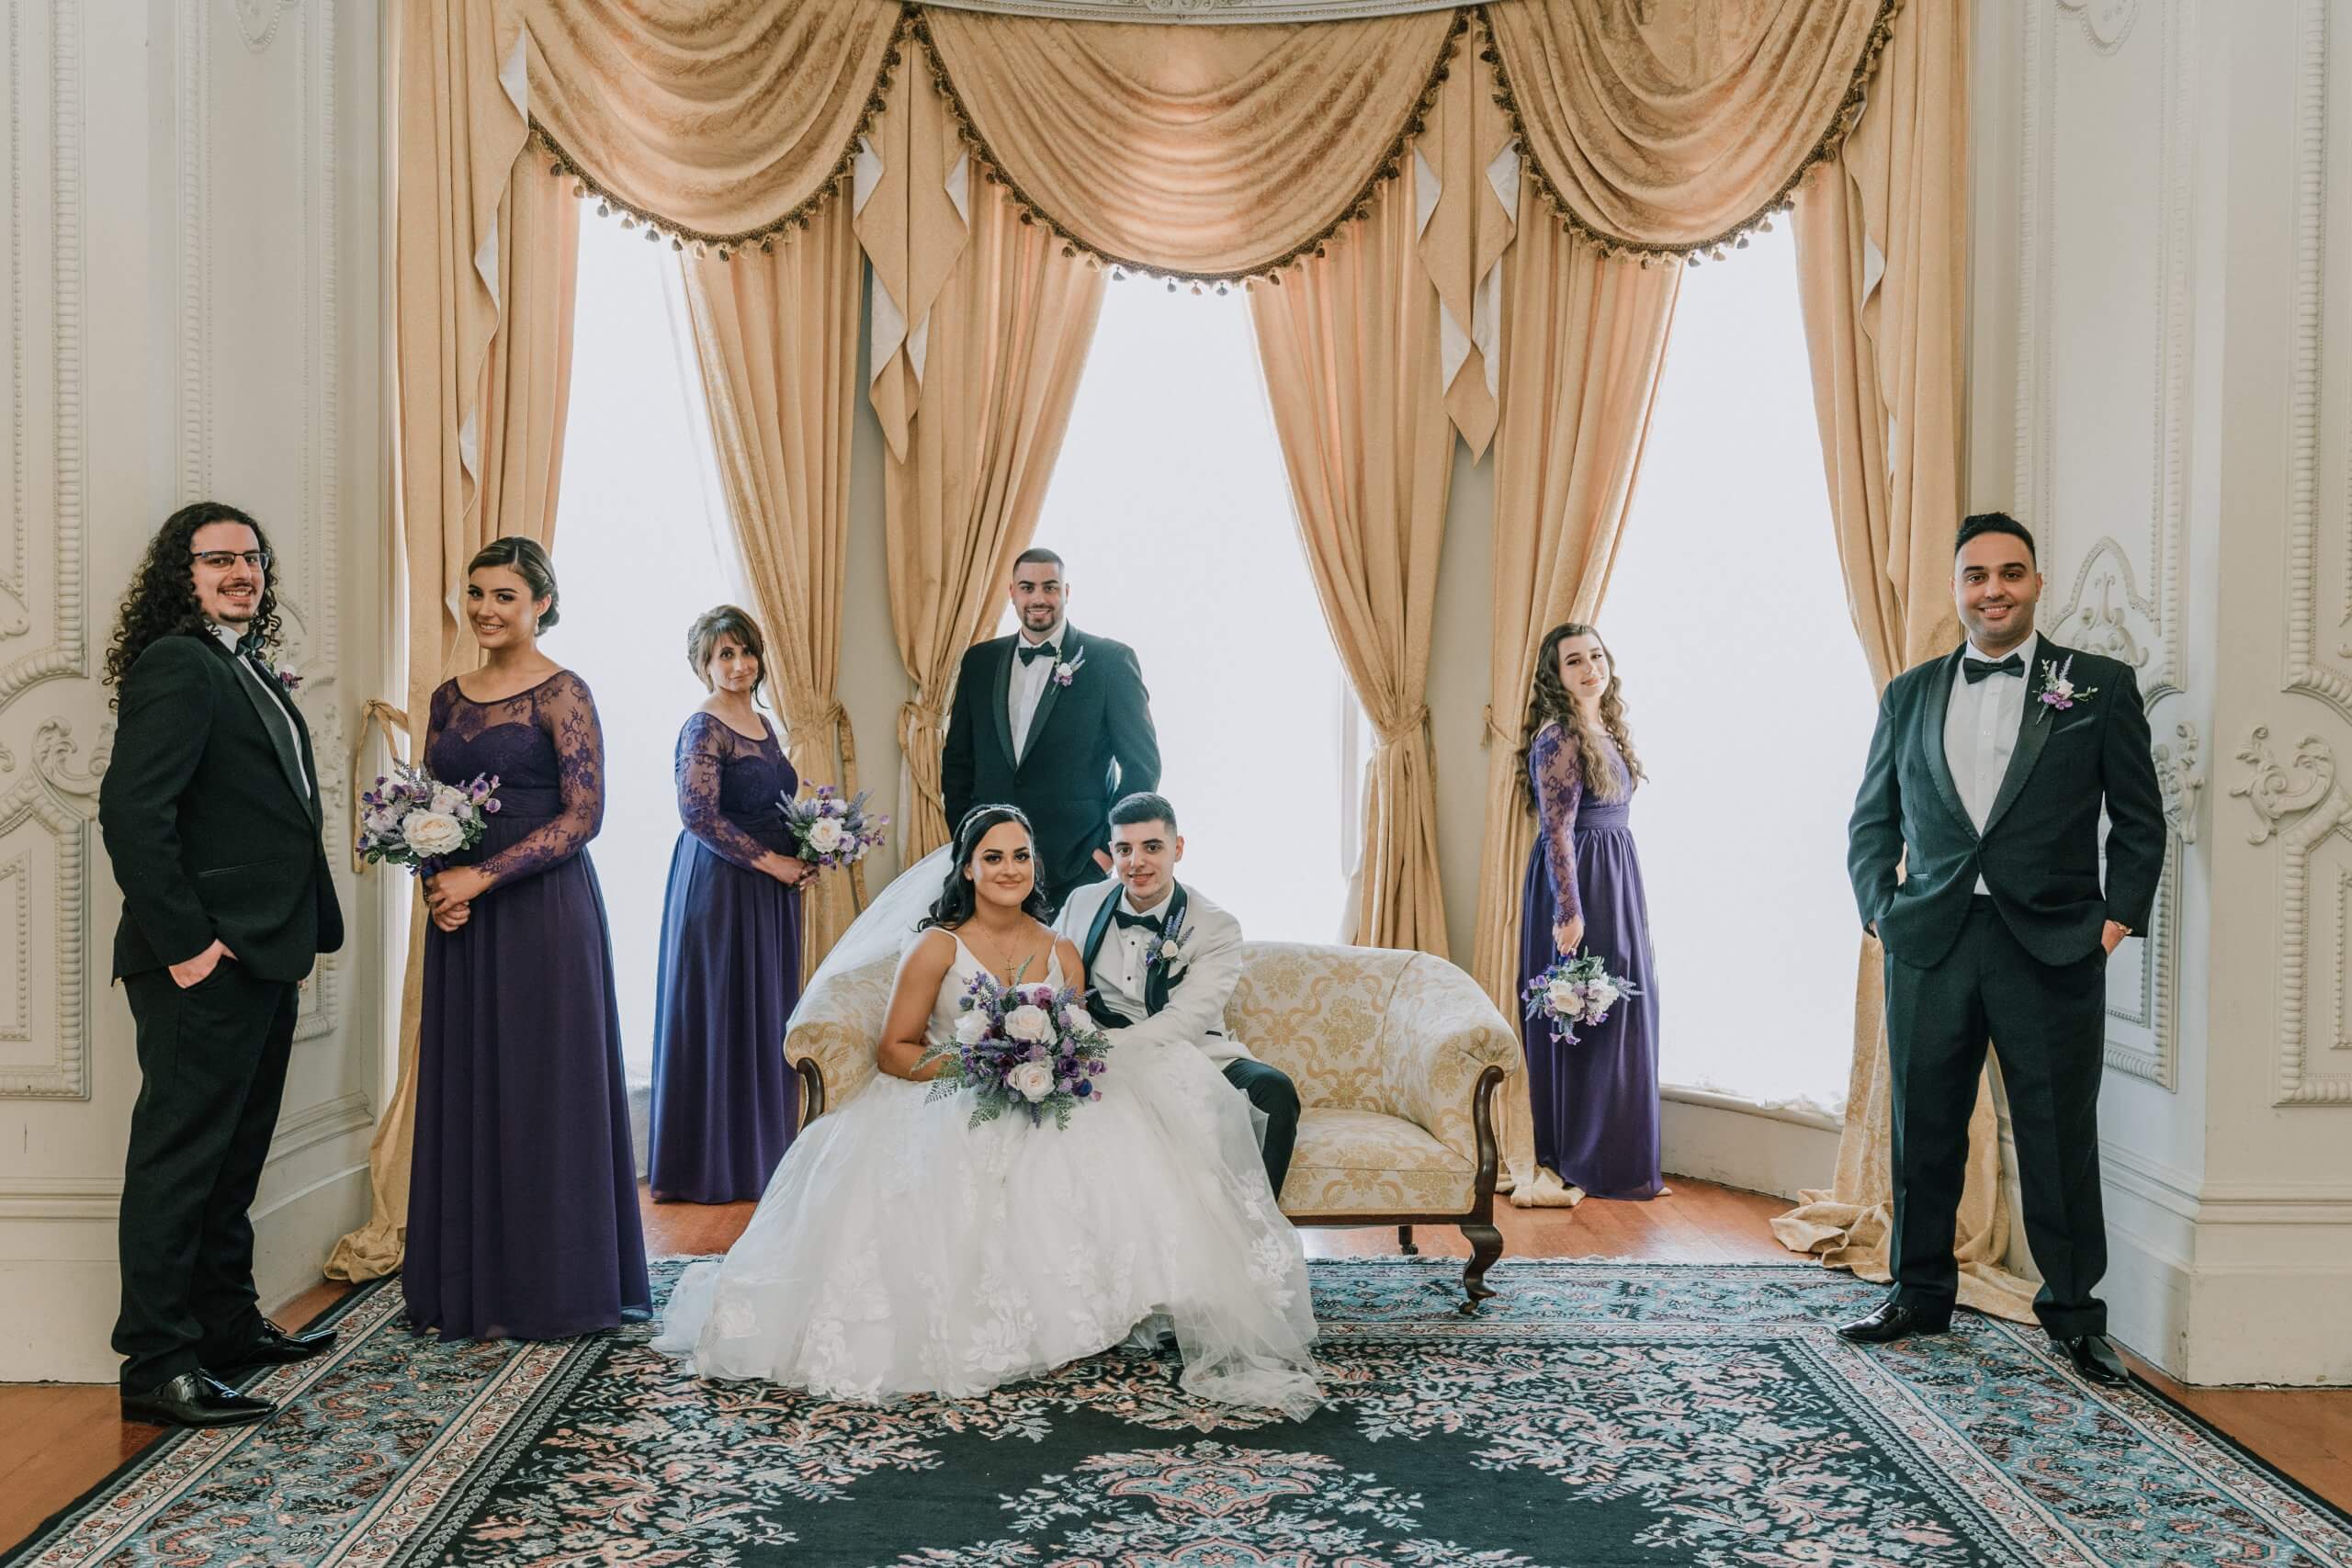 A regal photo of the bride and groom with their family. In a carpeted room with high ceilings and windows, couple sits in a love seat while their bridal party, clad in purple and black poses for the photo.